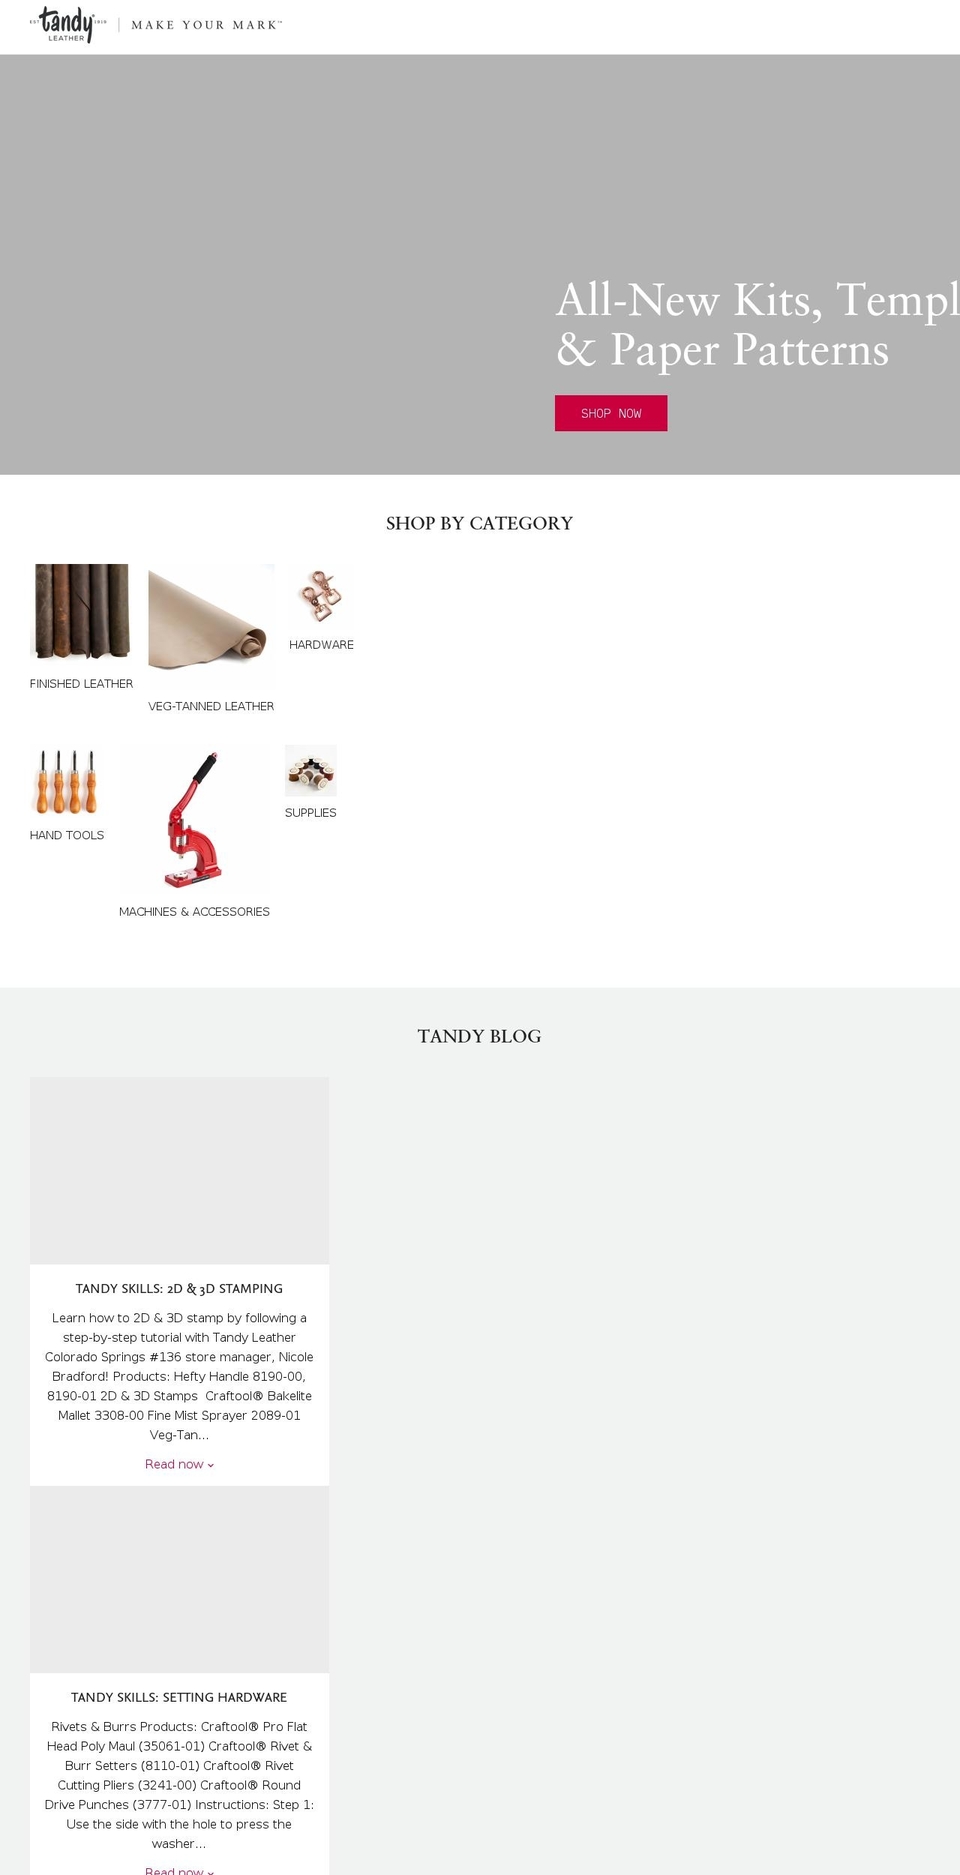 Leather Shopify theme site example tandyleatherfactory.co.uk